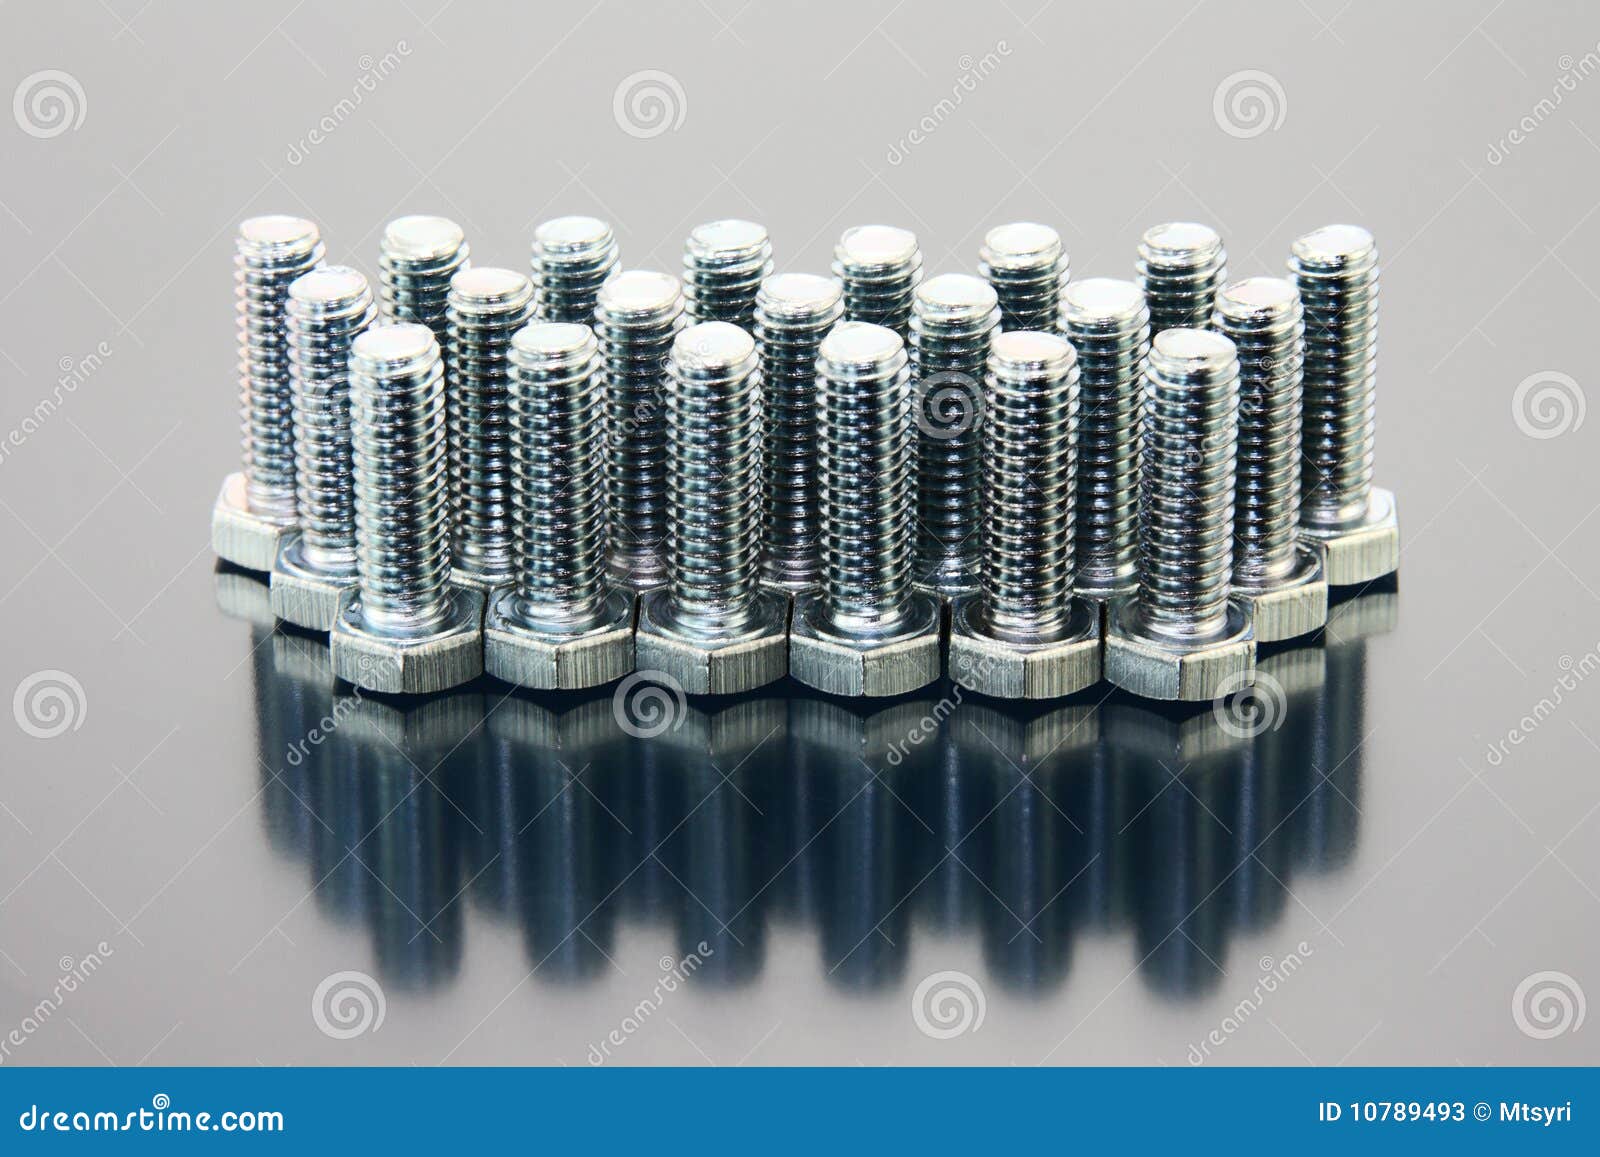 group of bolts